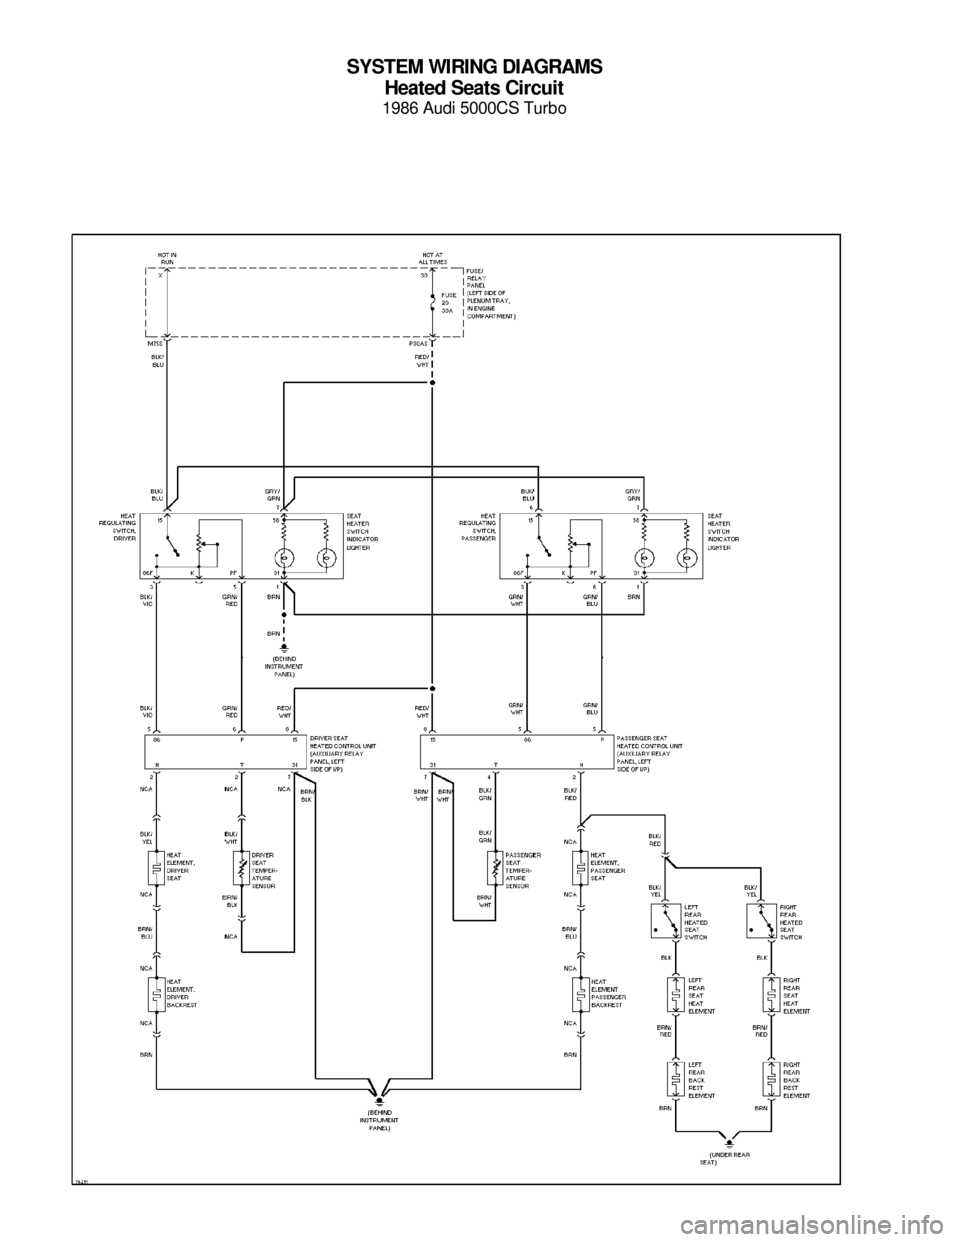 AUDI 5000CS 1986 C2 System Wiring Diagram SYSTEM WIRING DIAGRAMS
Heated Seats Circuit
1986 Audi 5000CS Turbo
For x    
Copyright © 1998 Mitchell Repair Information Company, LLCMonday, July 19, 2004  05:52PM 